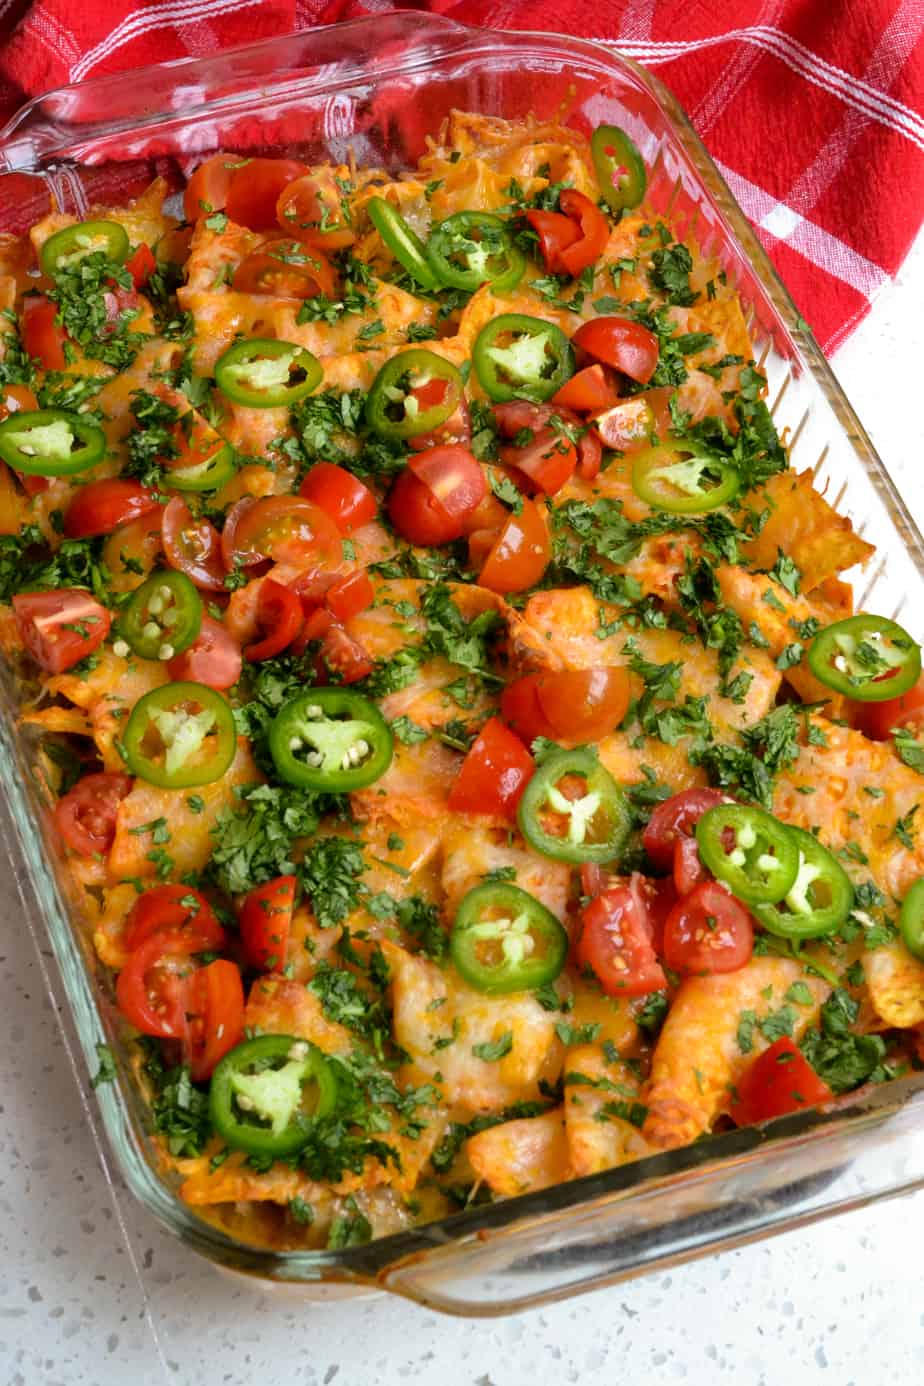 Nacho Cheese Doritos Casserole topped with cilantro, tomatoes, and jalapenos